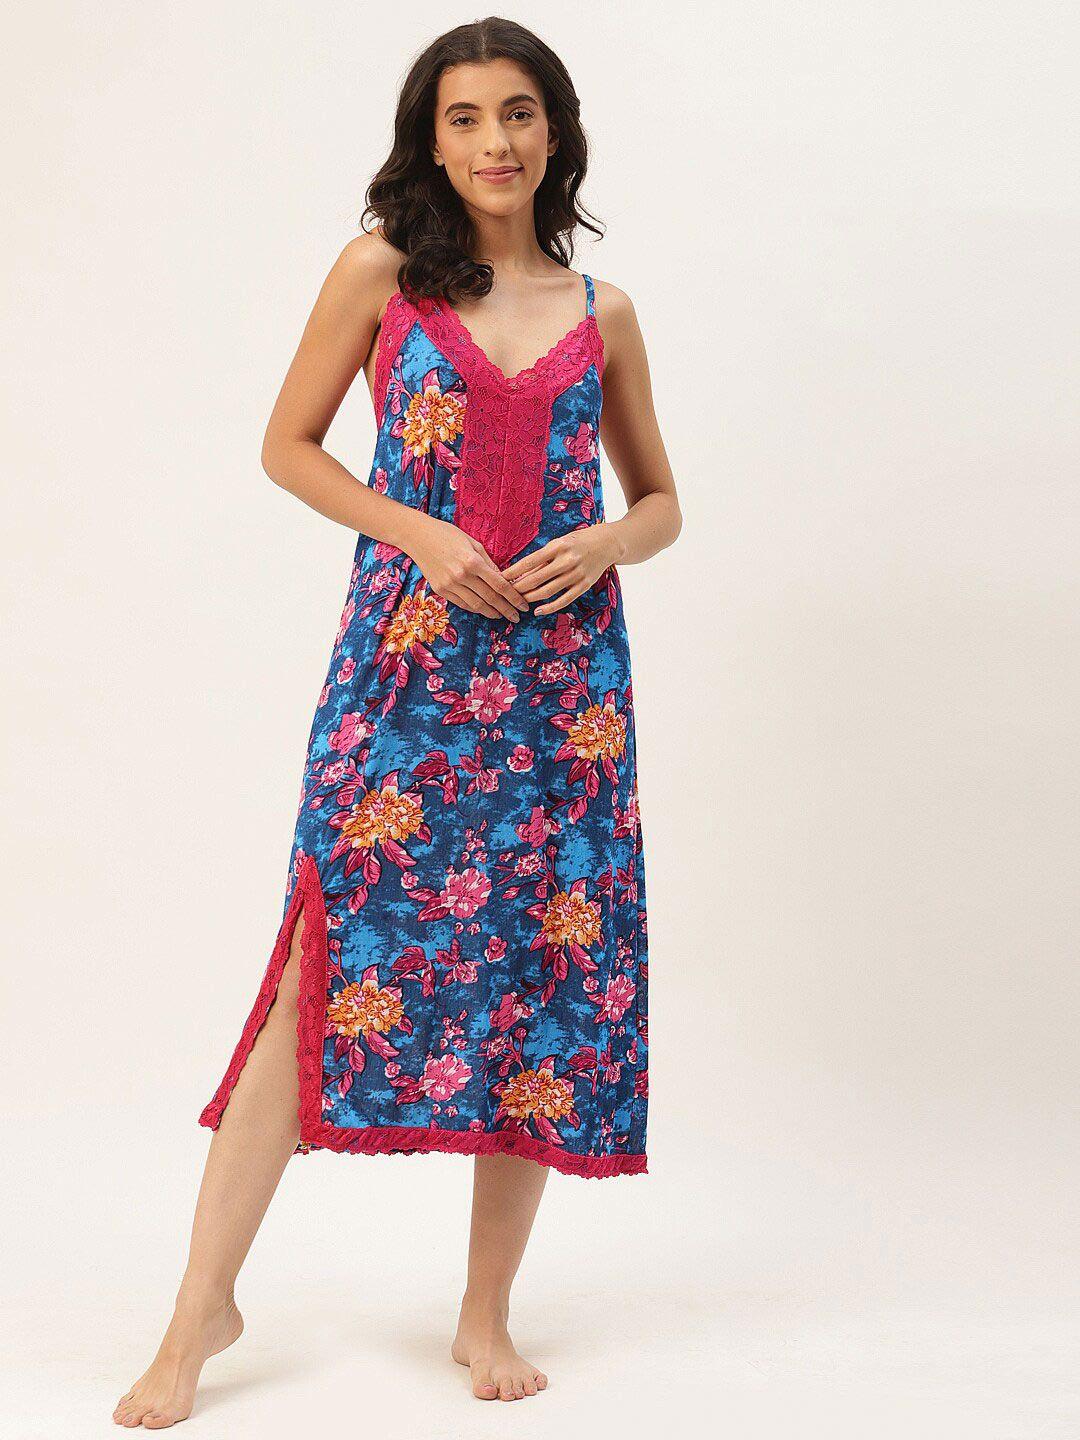 ms.lingies v neck floral printed nightdress